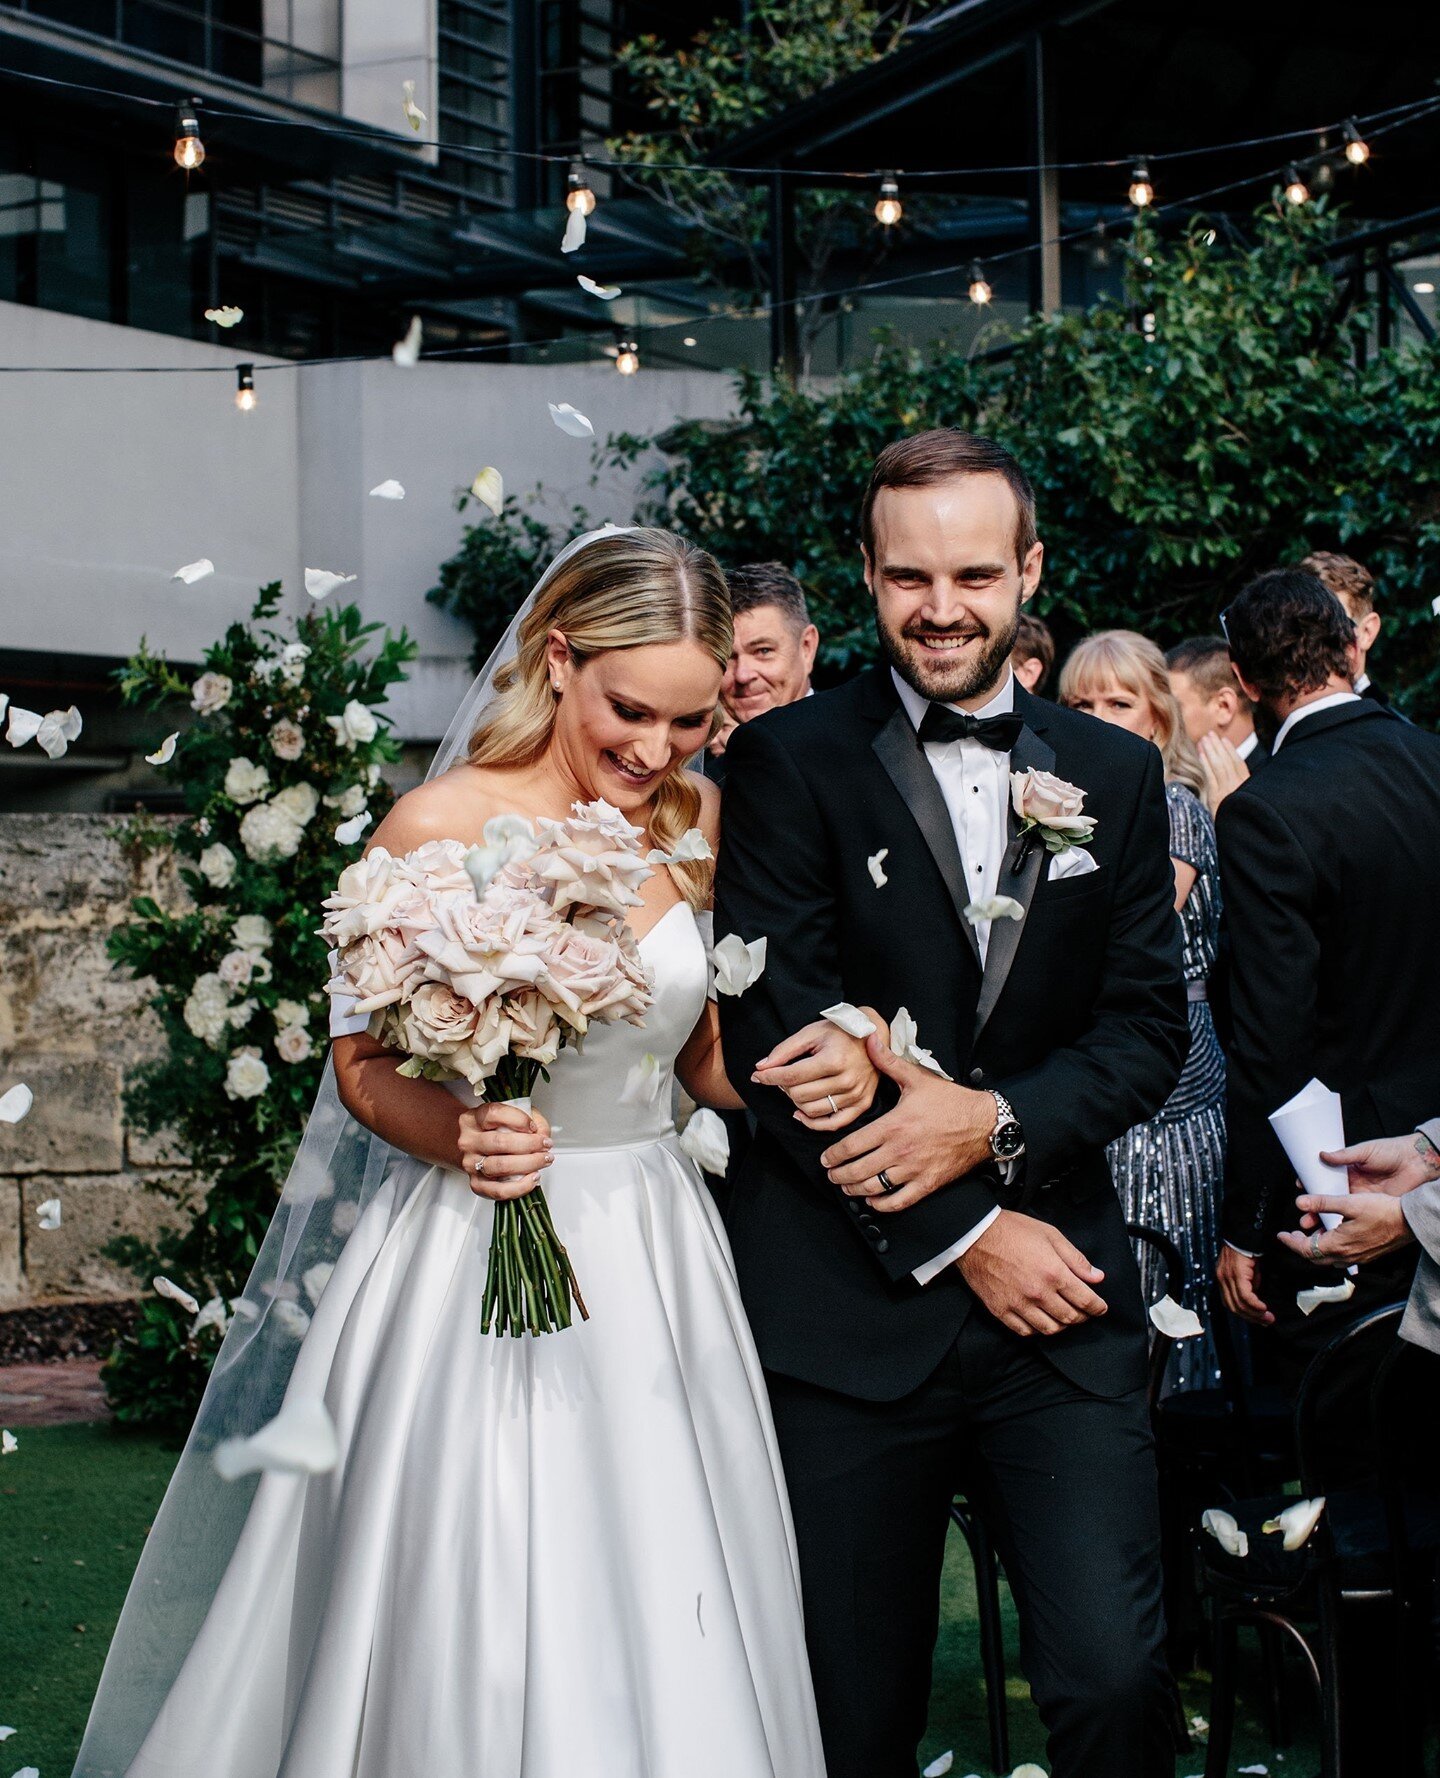 Madi &amp; Nic have been featured on @polkadotwedding for their Black &amp; White issue. Head to their website to check it all out. Such a beautiful day put together by such an amazing team! ⁠
⁠
Hearts are full today! ⁠
&ldquo;Ebony was amazing. She 